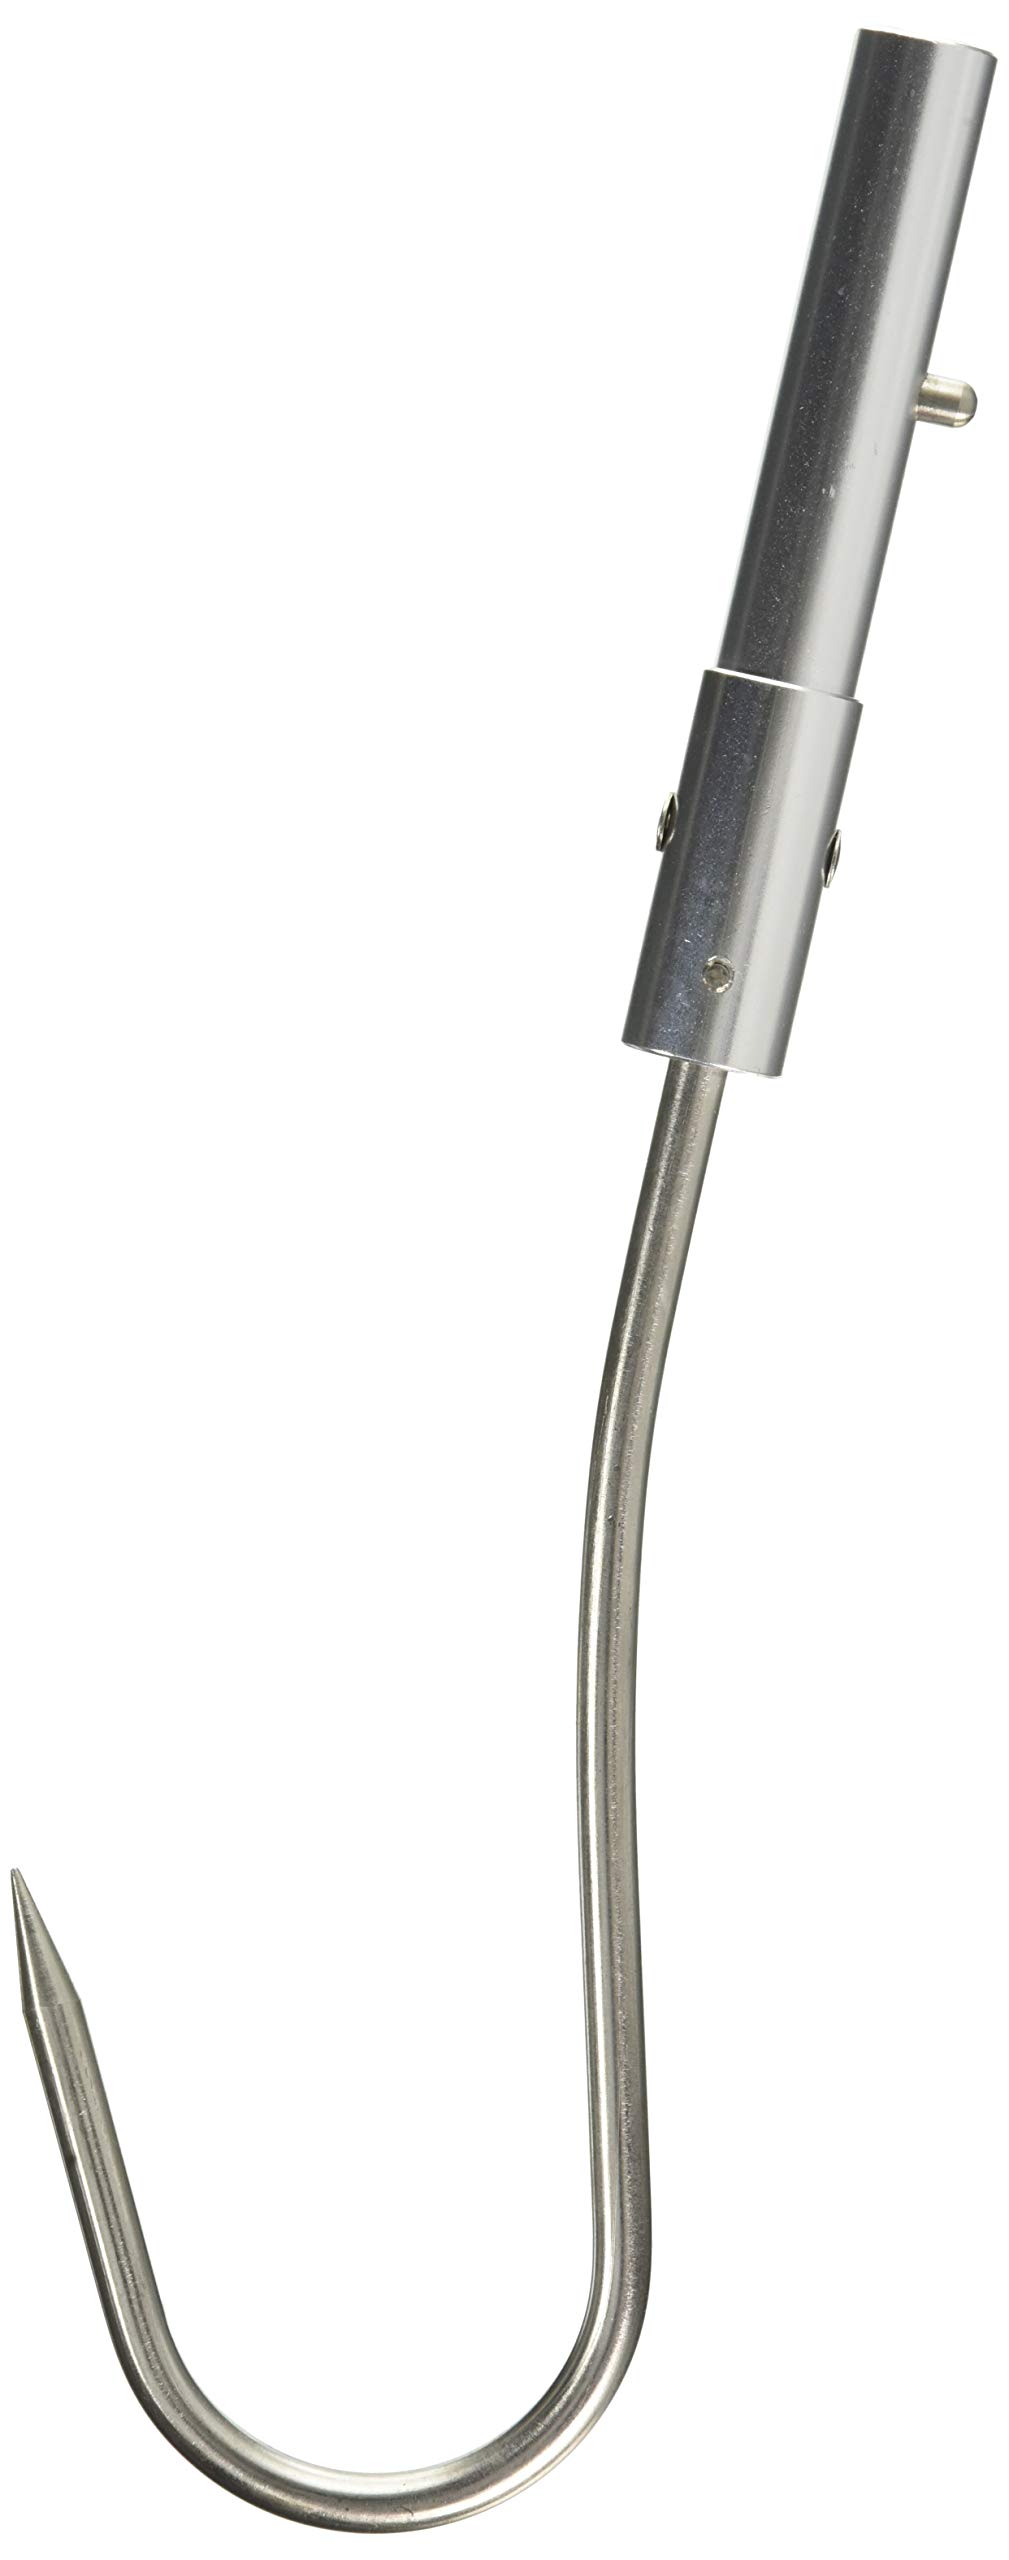 Camco 41942 Fishing Gaff Attachment, Stainless Steel von Camco